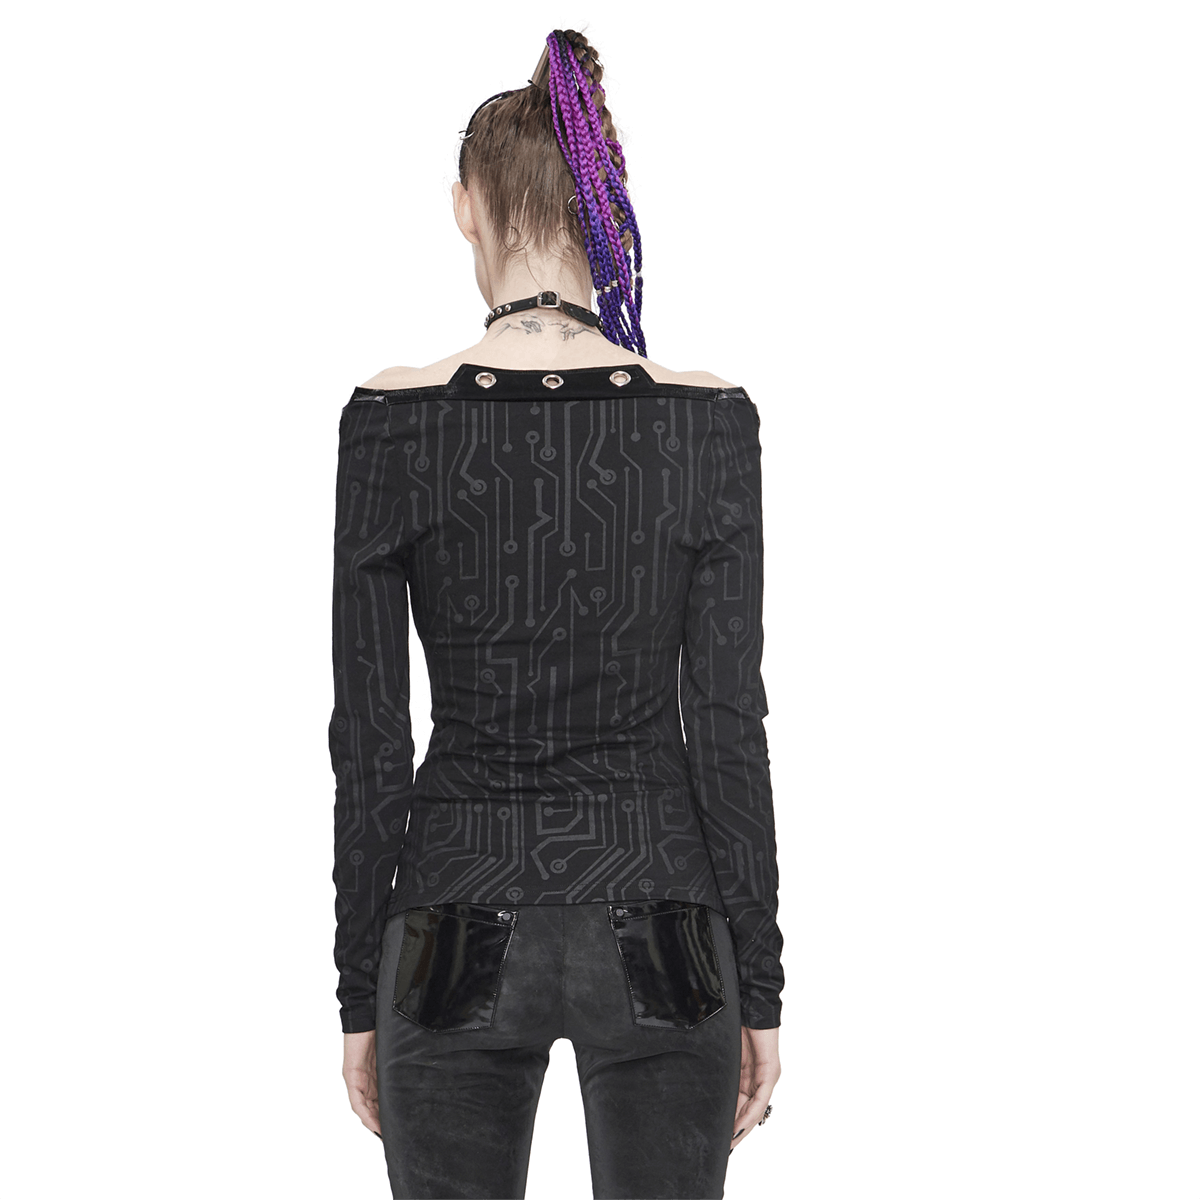 Cyberpunk Women's Stretch Top with Sci-Fi Print / Black Long Sleeves Tops with Small Zipper - HARD'N'HEAVY